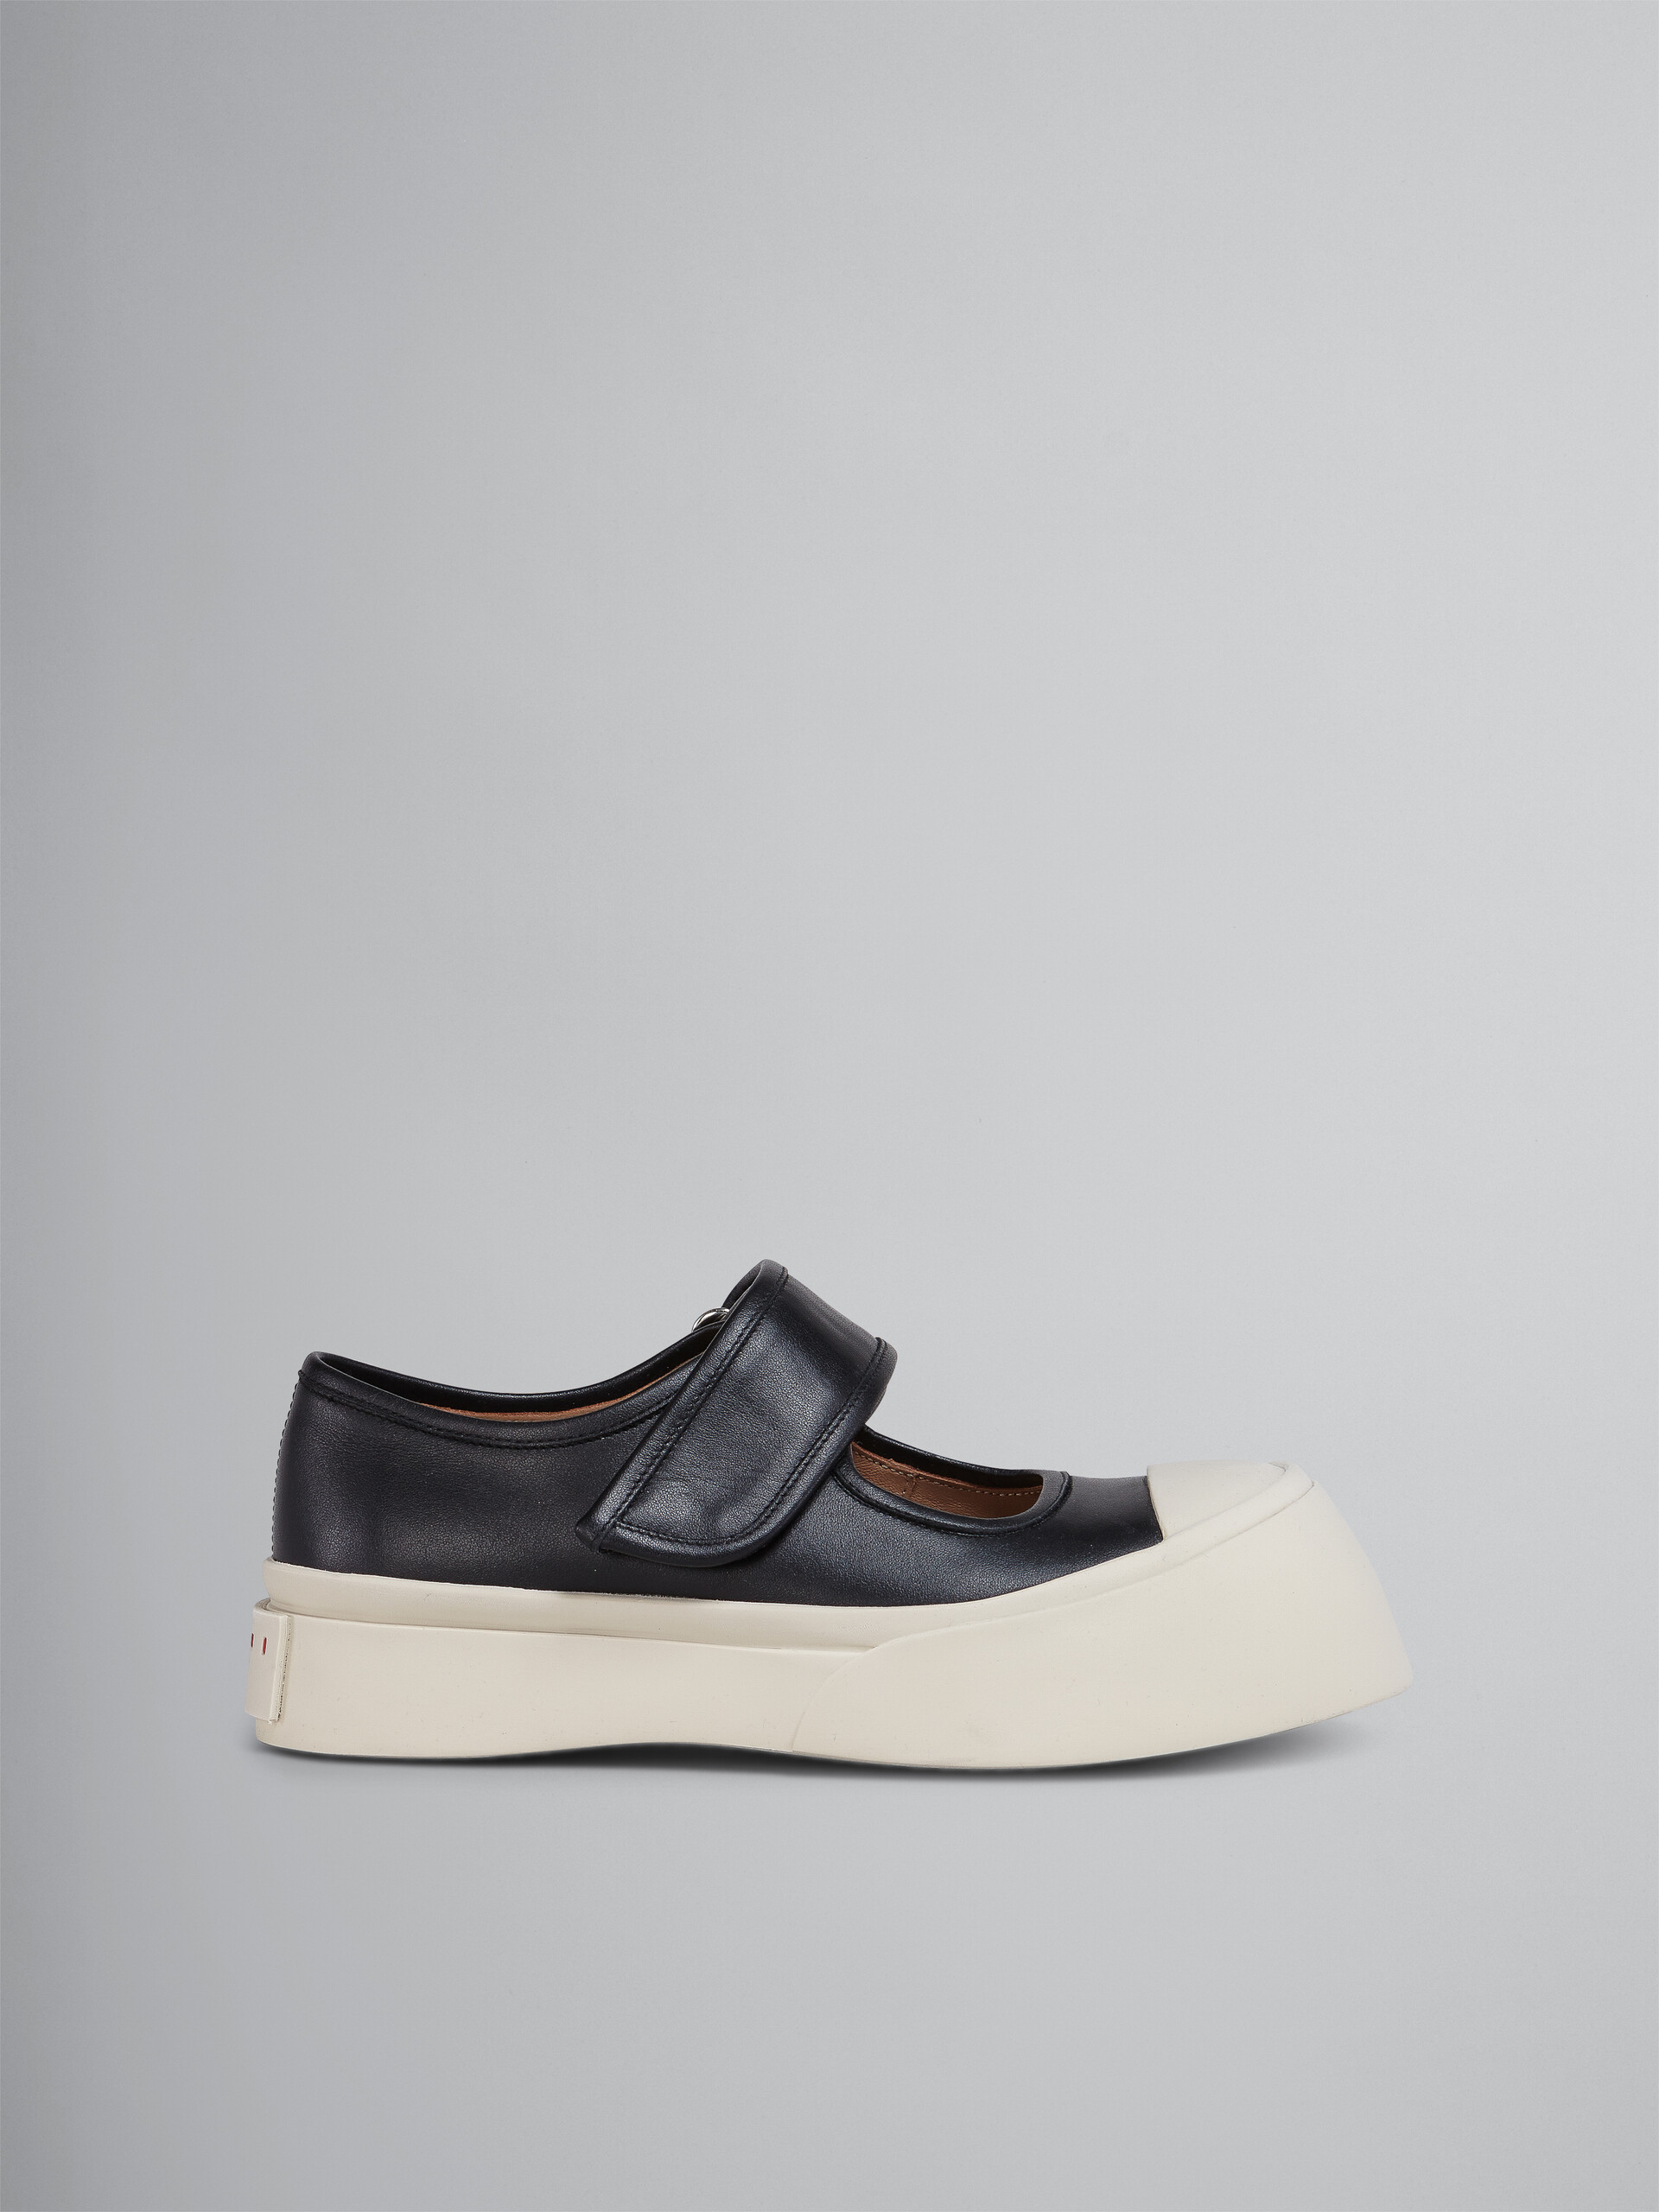 Black nappa leather PABLO Mary-Jane sneaker - Sneakers - Image 1